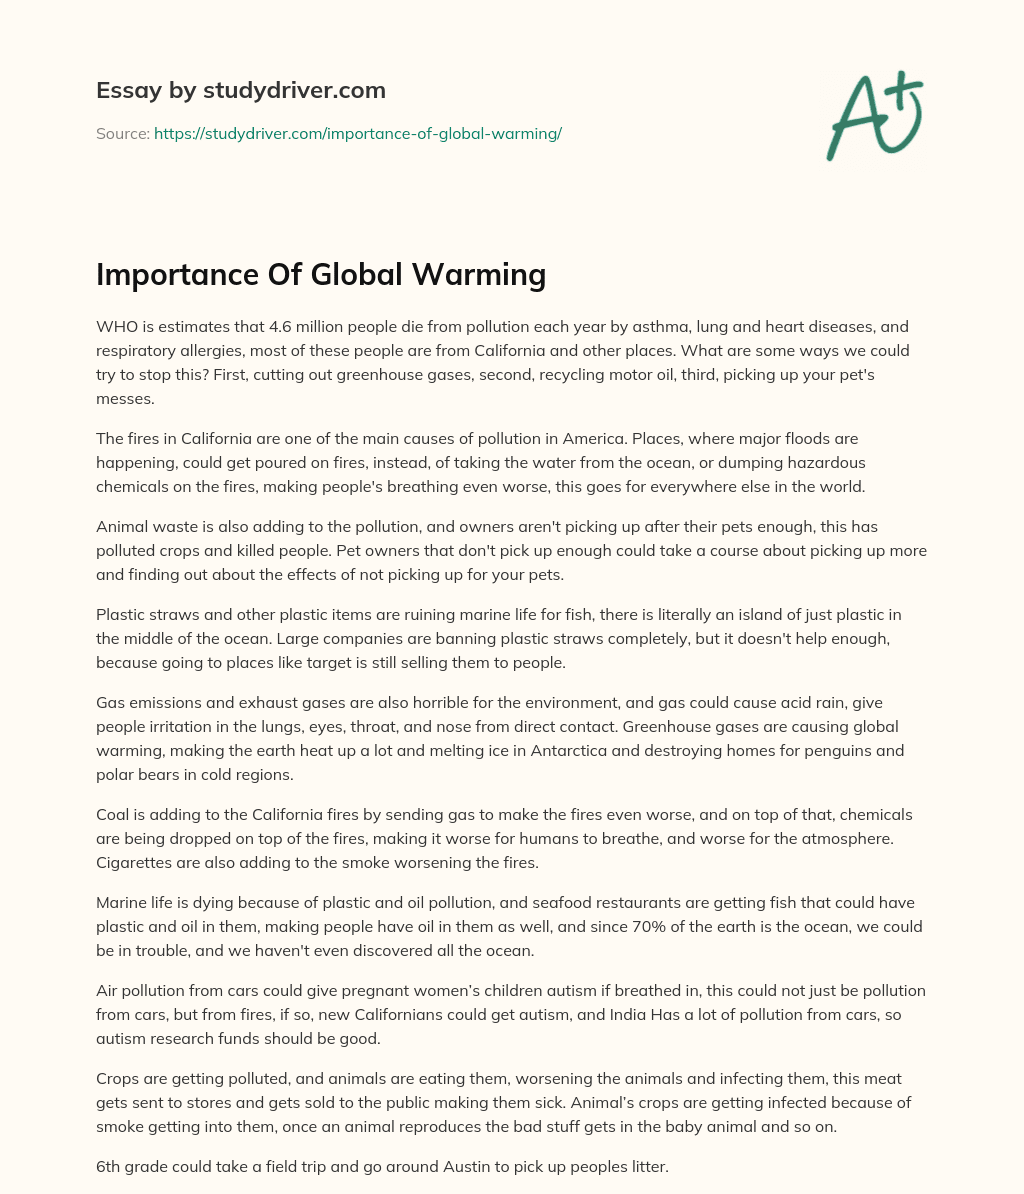 Importance of Global Warming essay